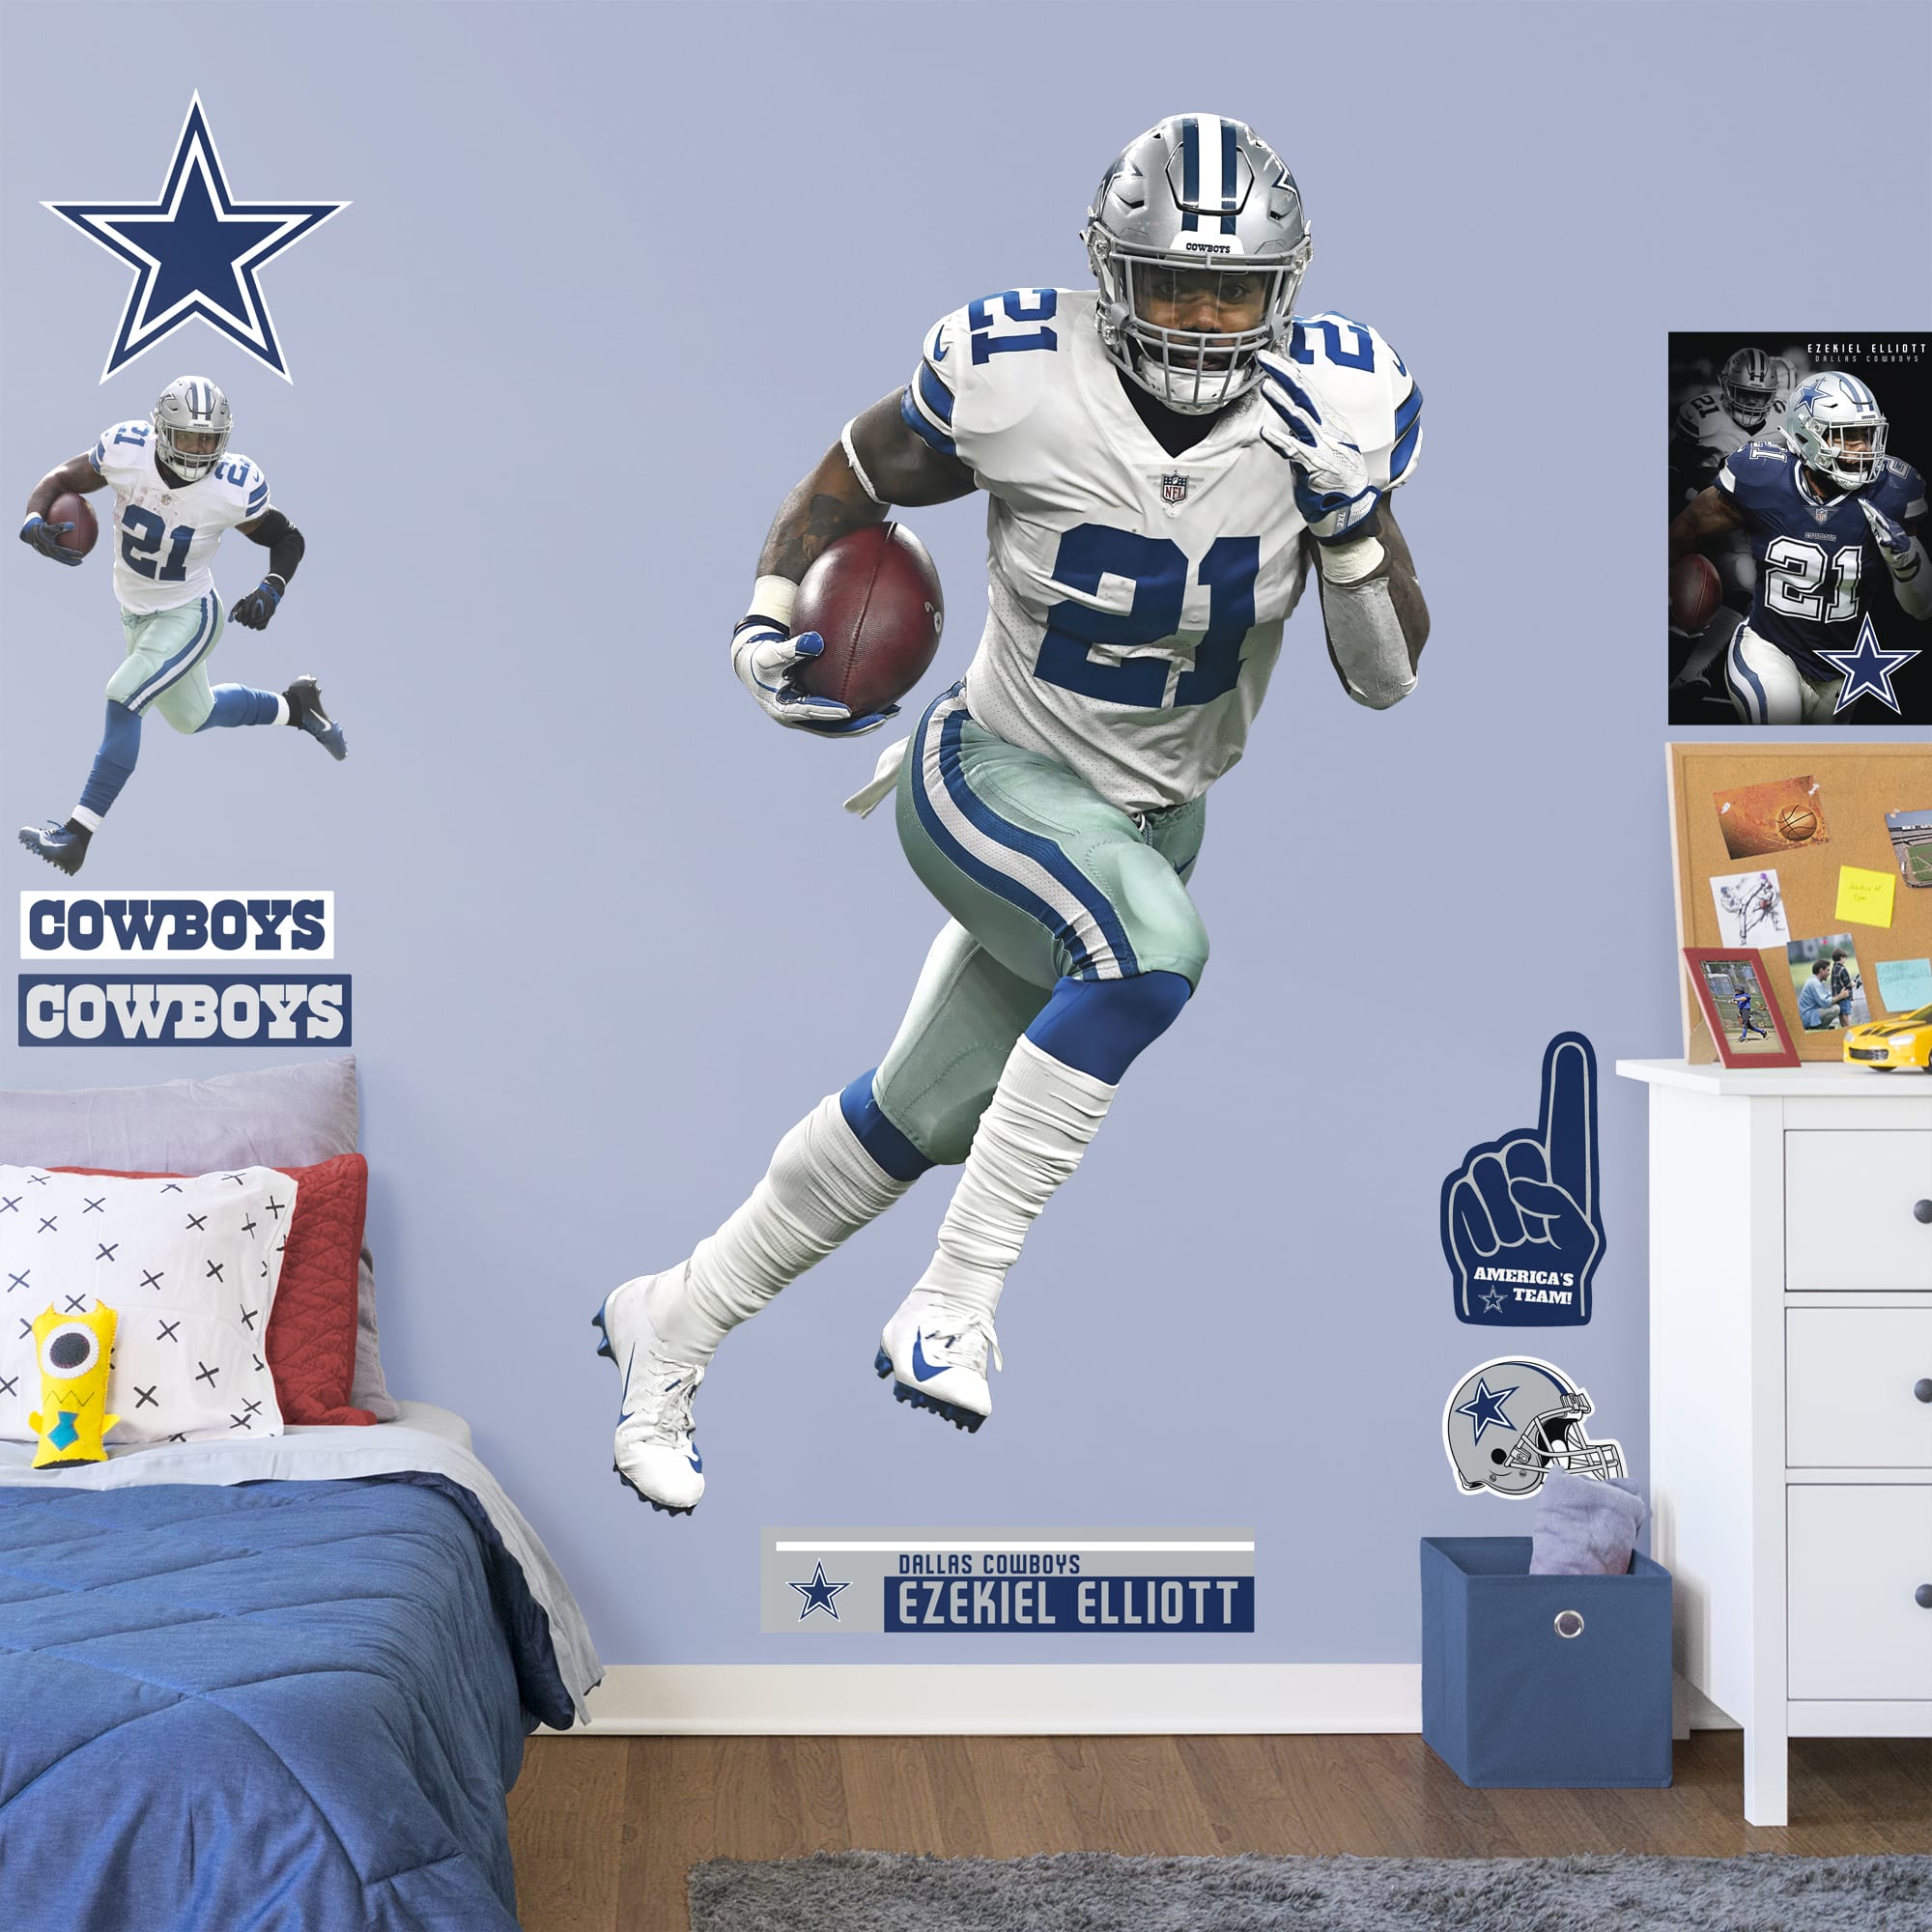 Ezekiel Elliott for Dallas Cowboys: Gamebreaker - Officially Licensed NFL Removable Wall Decal Life-Size Athlete + 10 Decals (51